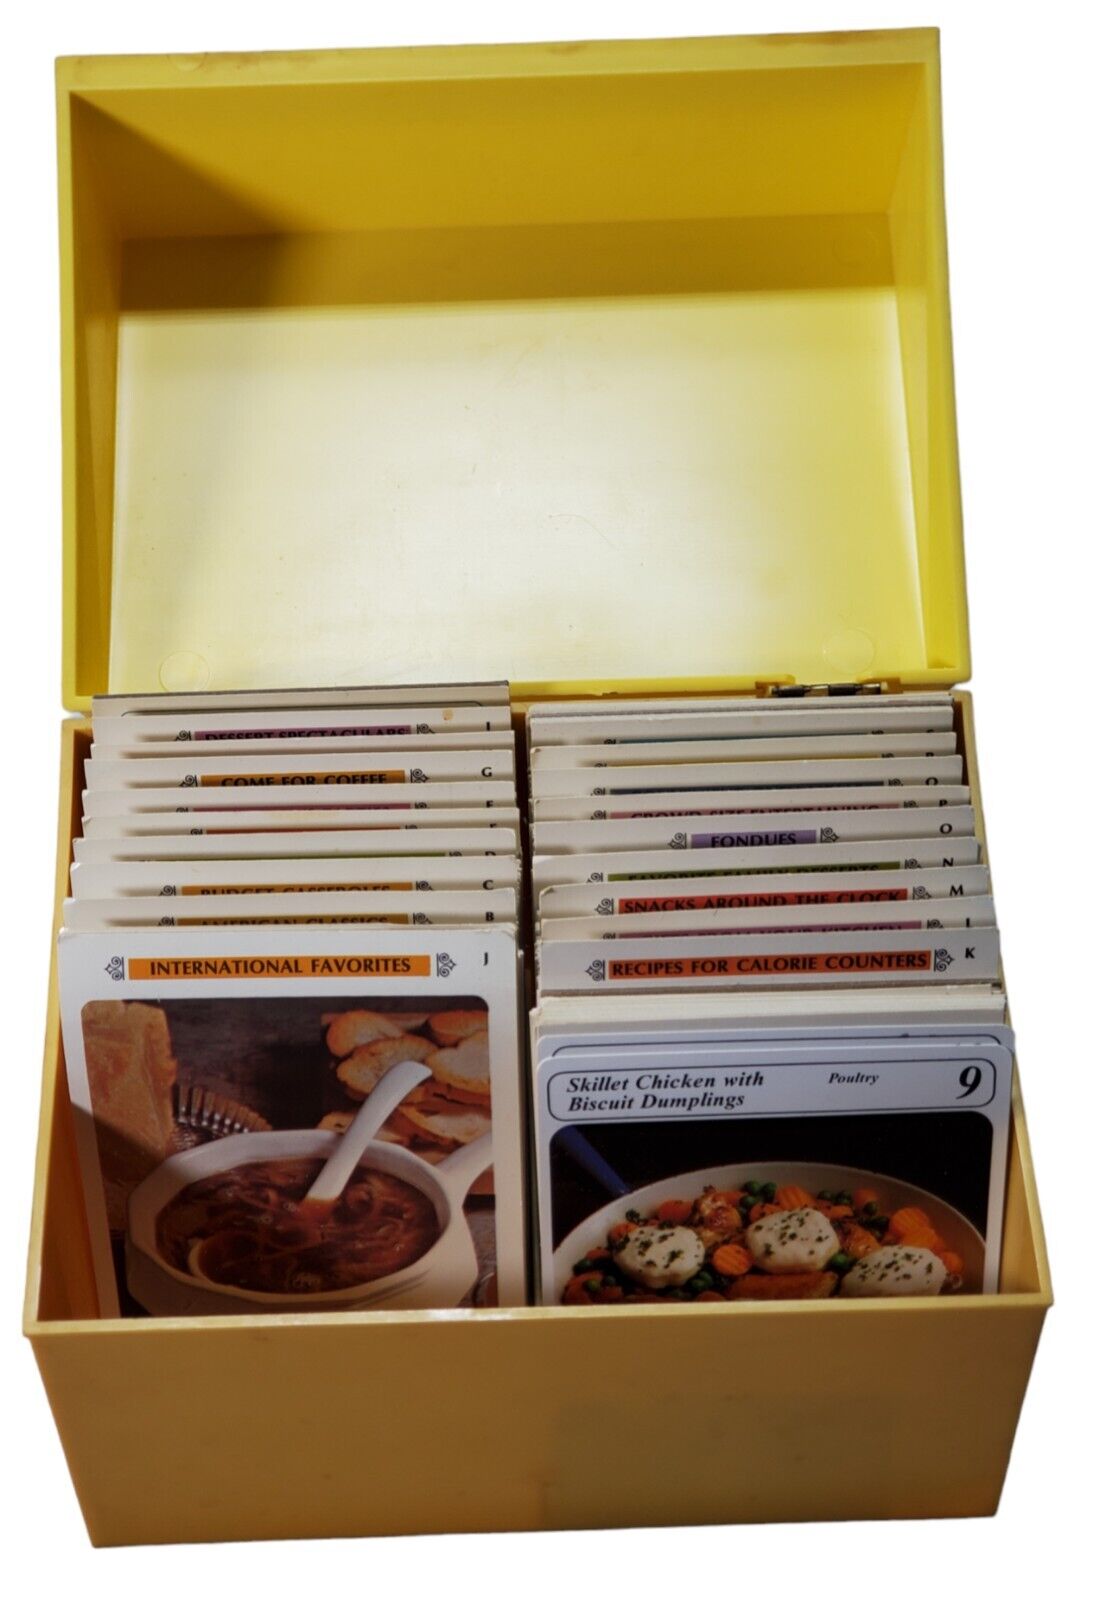 Vintage Betty Crocker Recipe Card Library Yellow Box with Recipe Cards